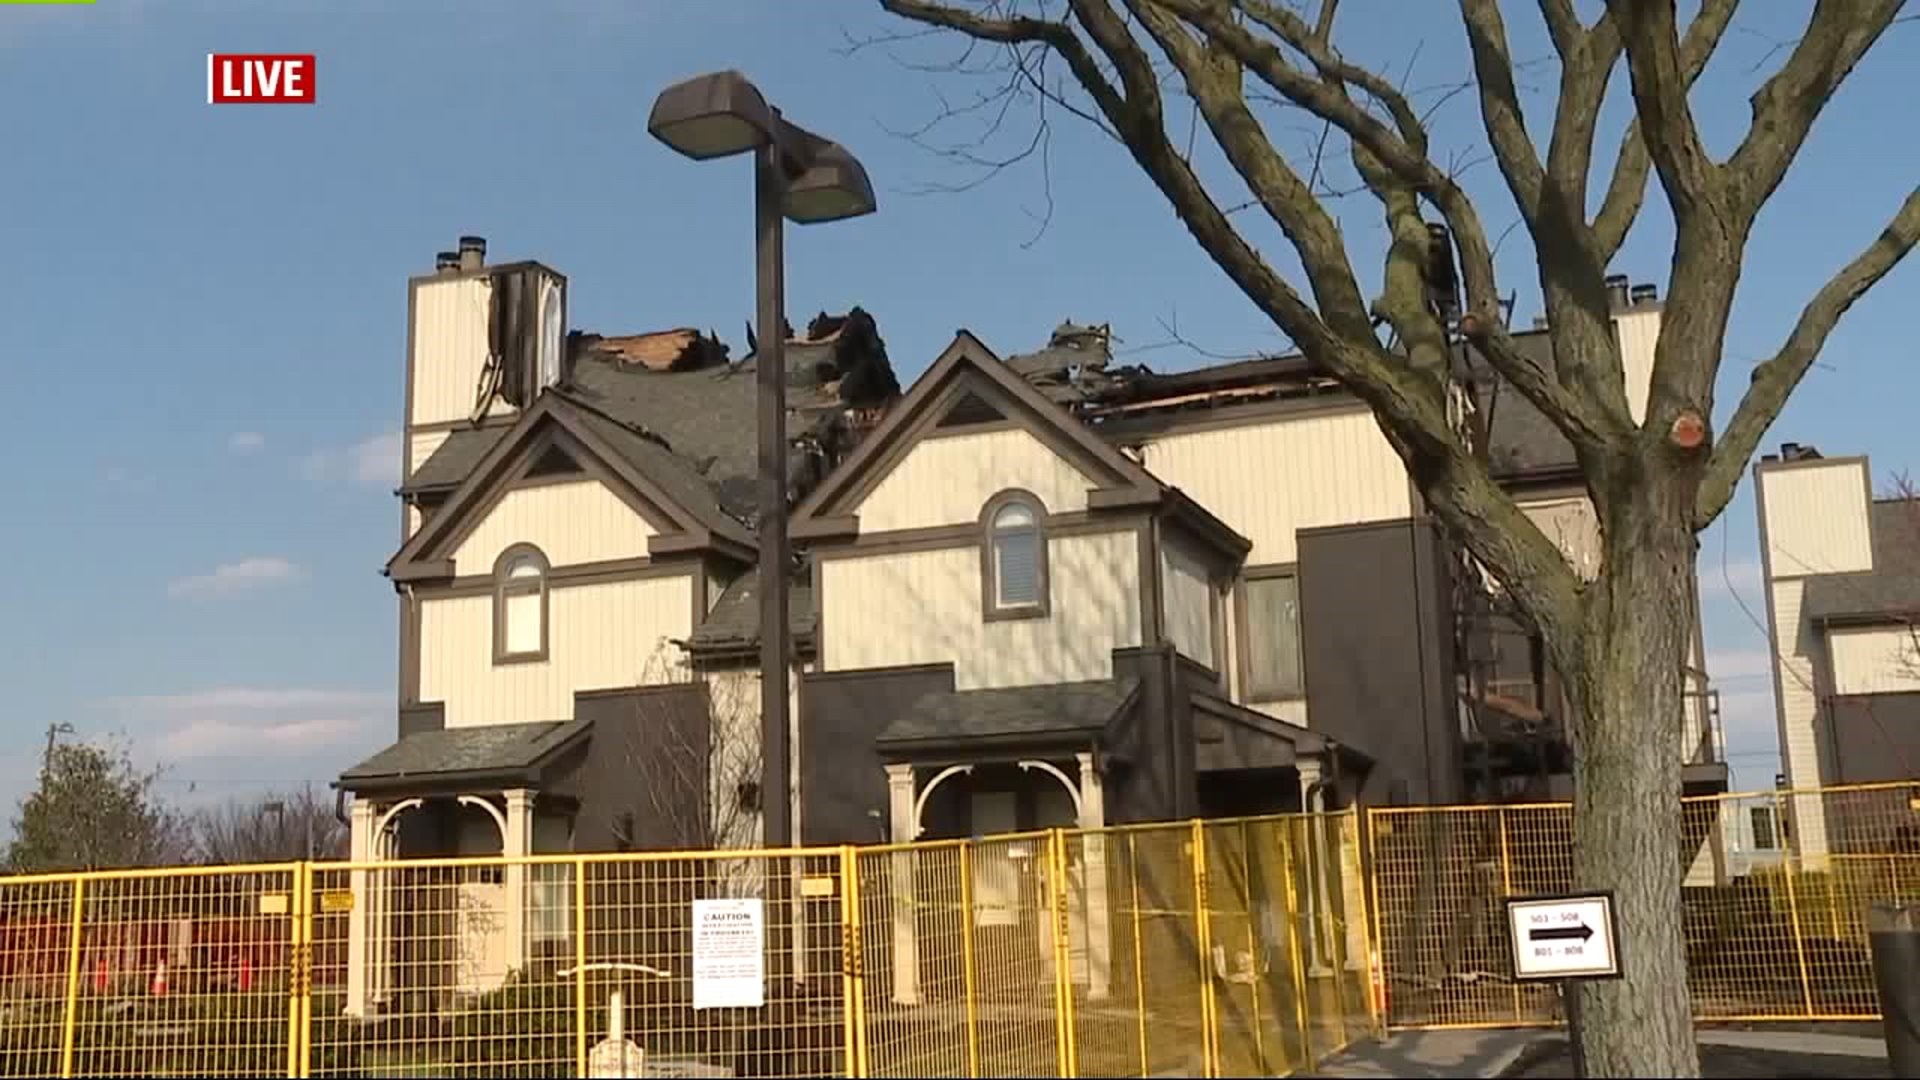 Investigation continues after fire at Eden Resort in Lancaster